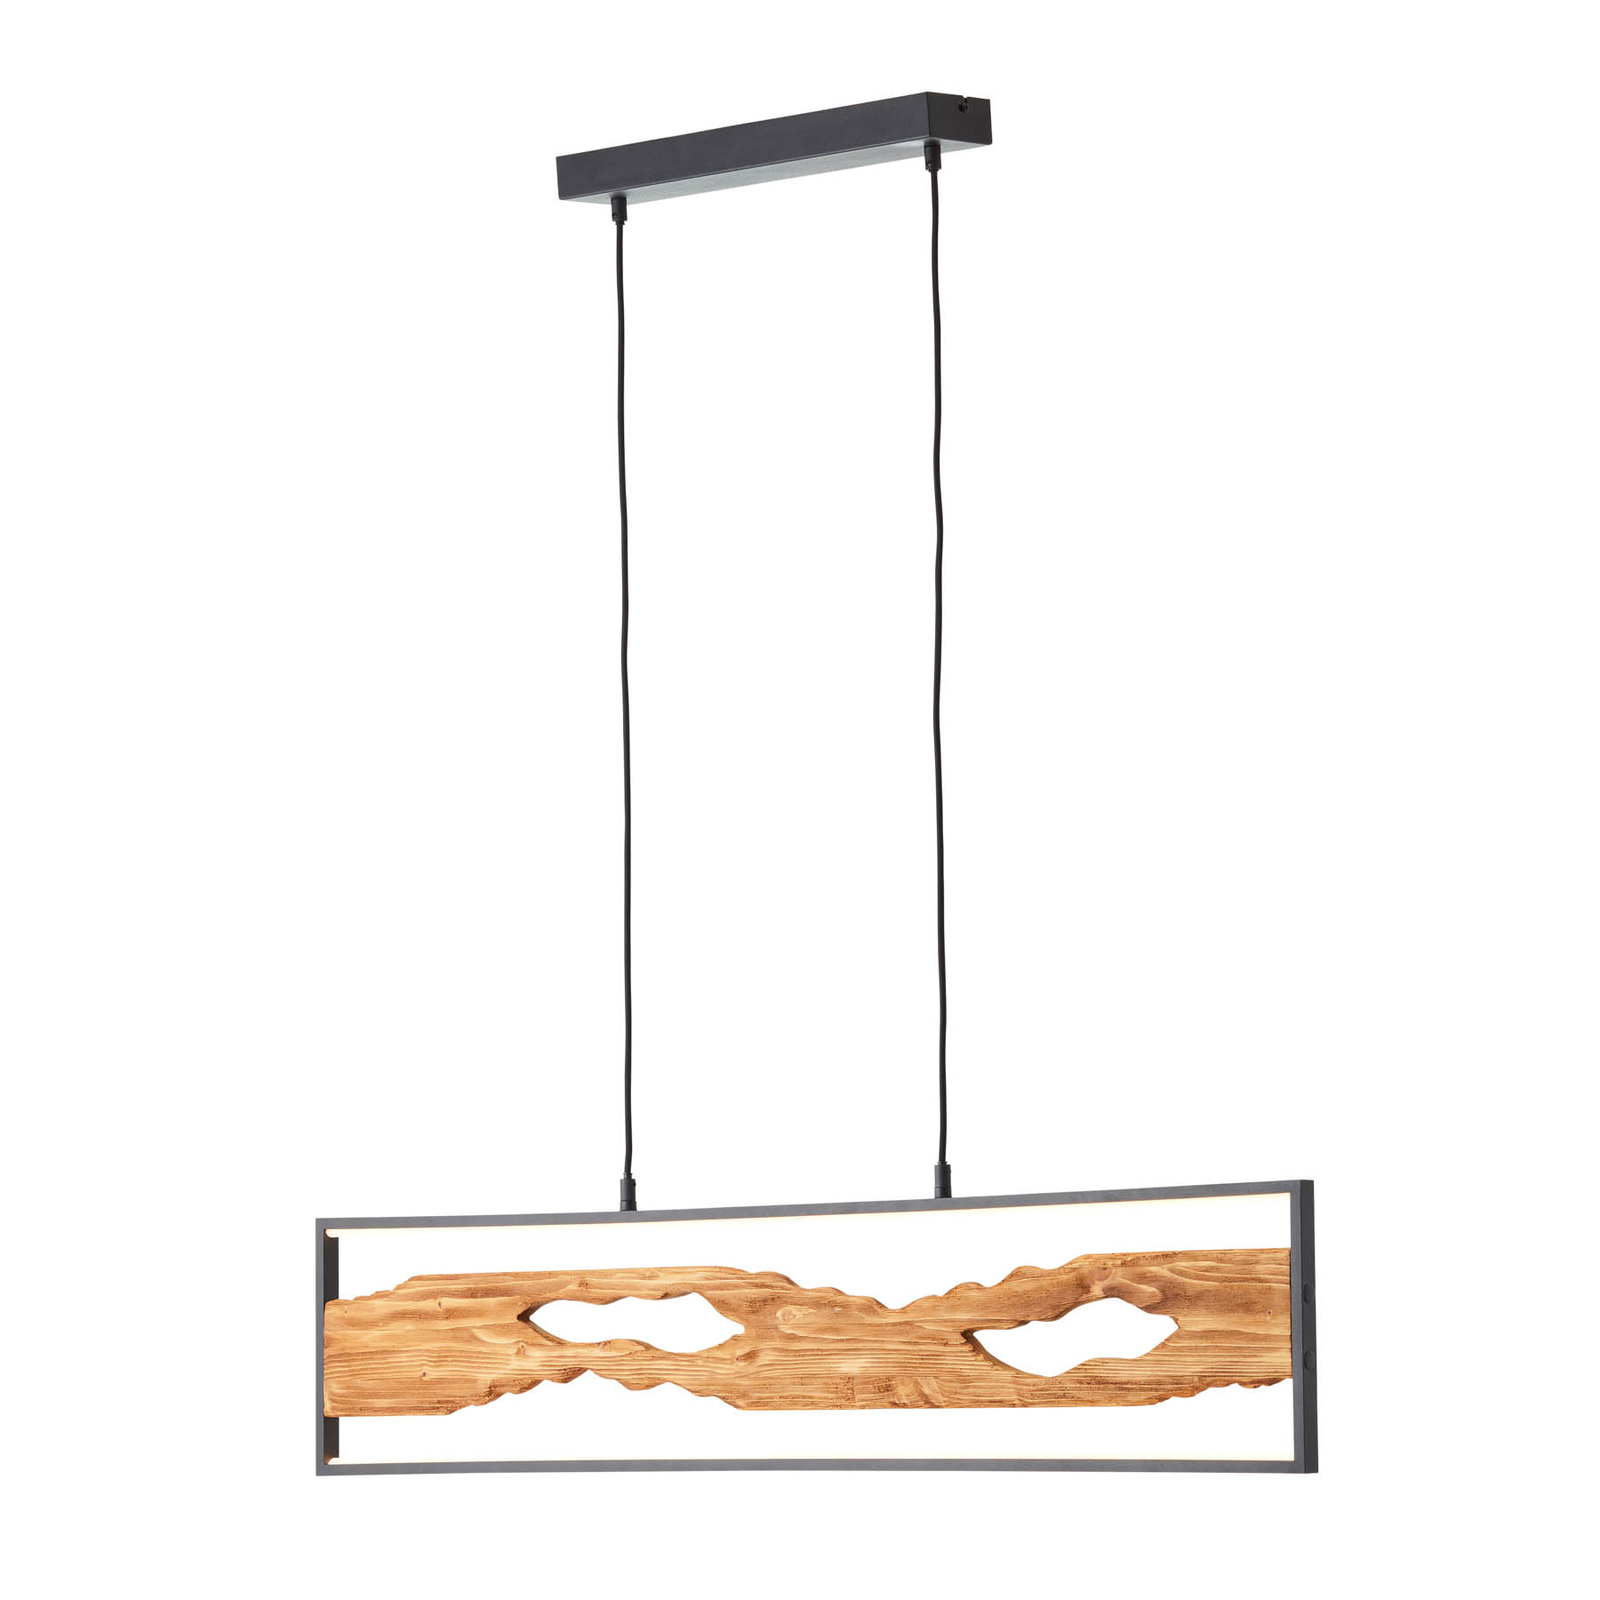 LED hanglamp Chaumont van hout